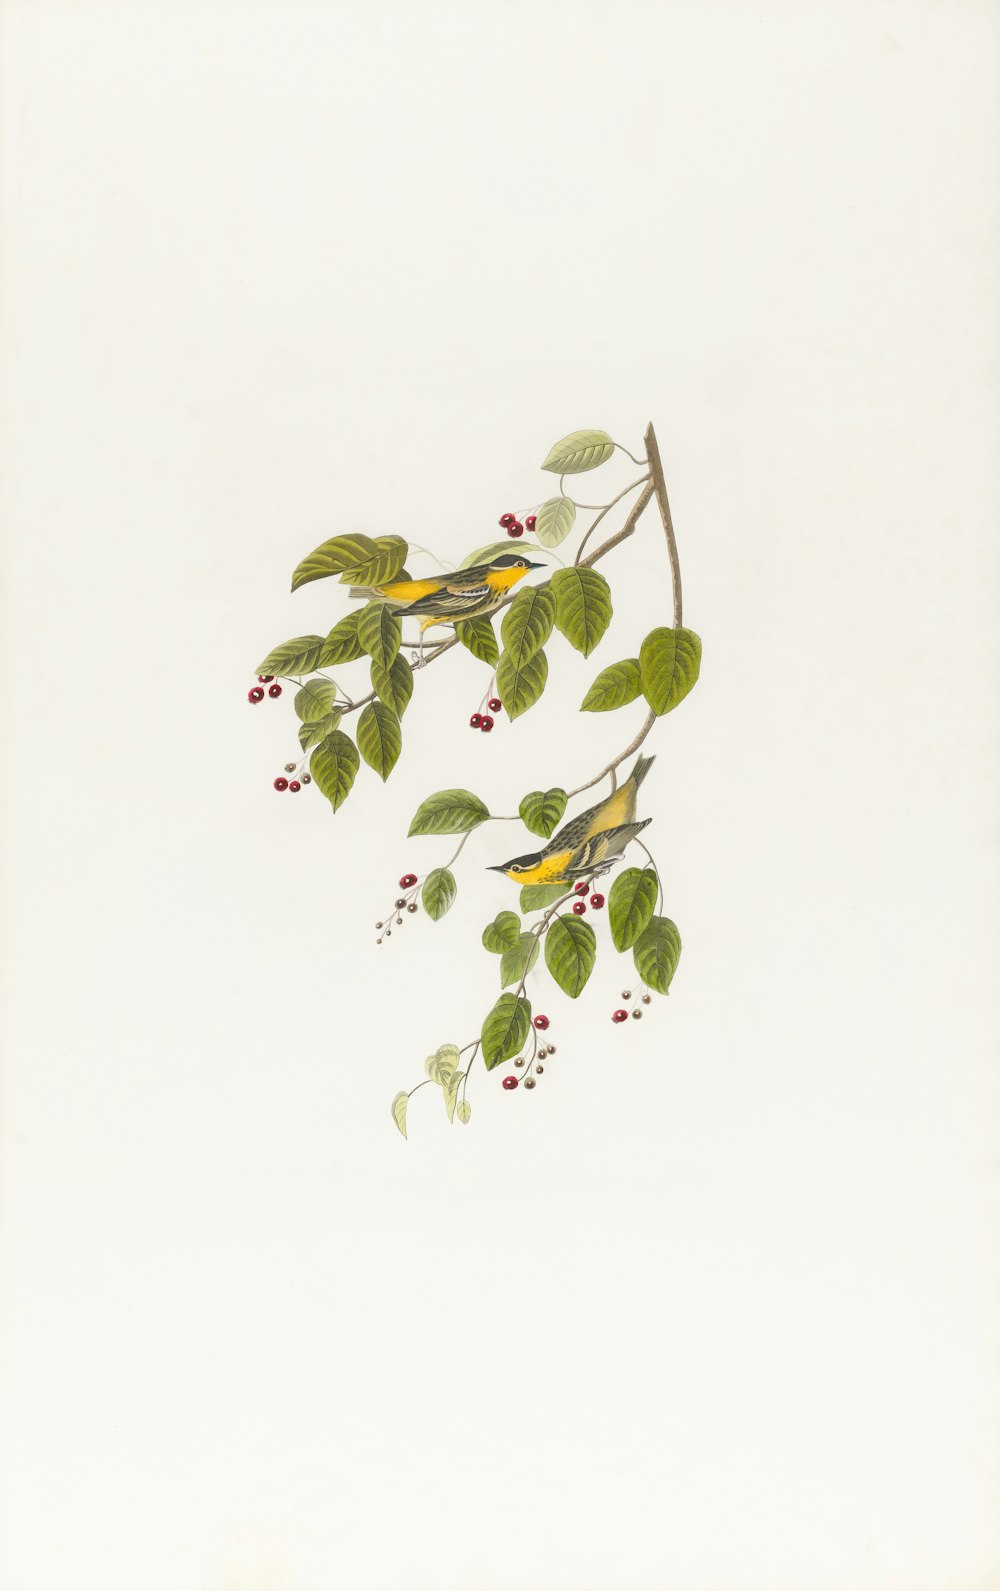 a painting of a bird on a branch with berries